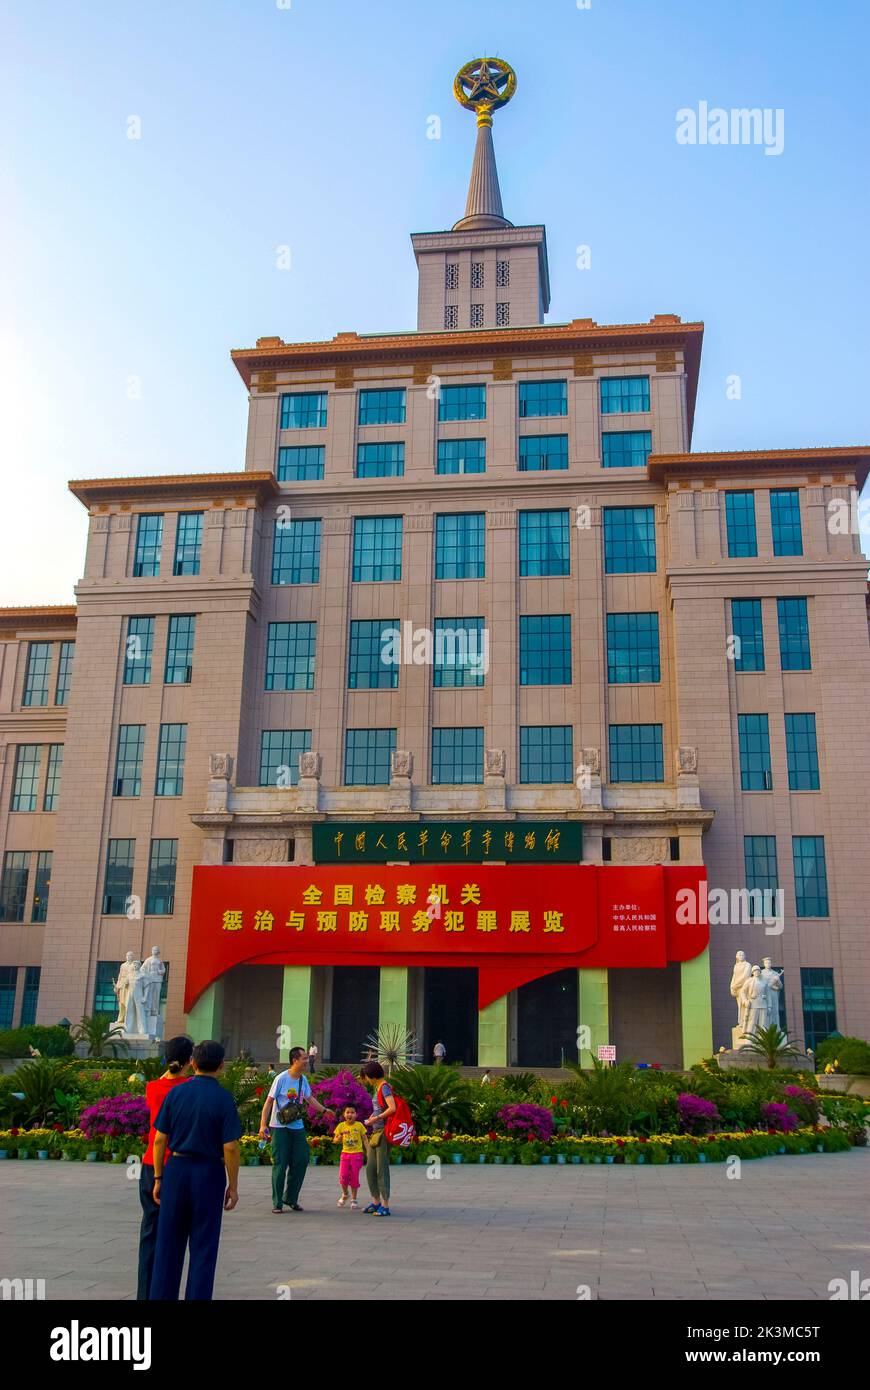 Beijing, CHINA- Monuments, Museums- The Military Museum of Chinese People's Revolution, Front With Chinese Sign Stock Photo